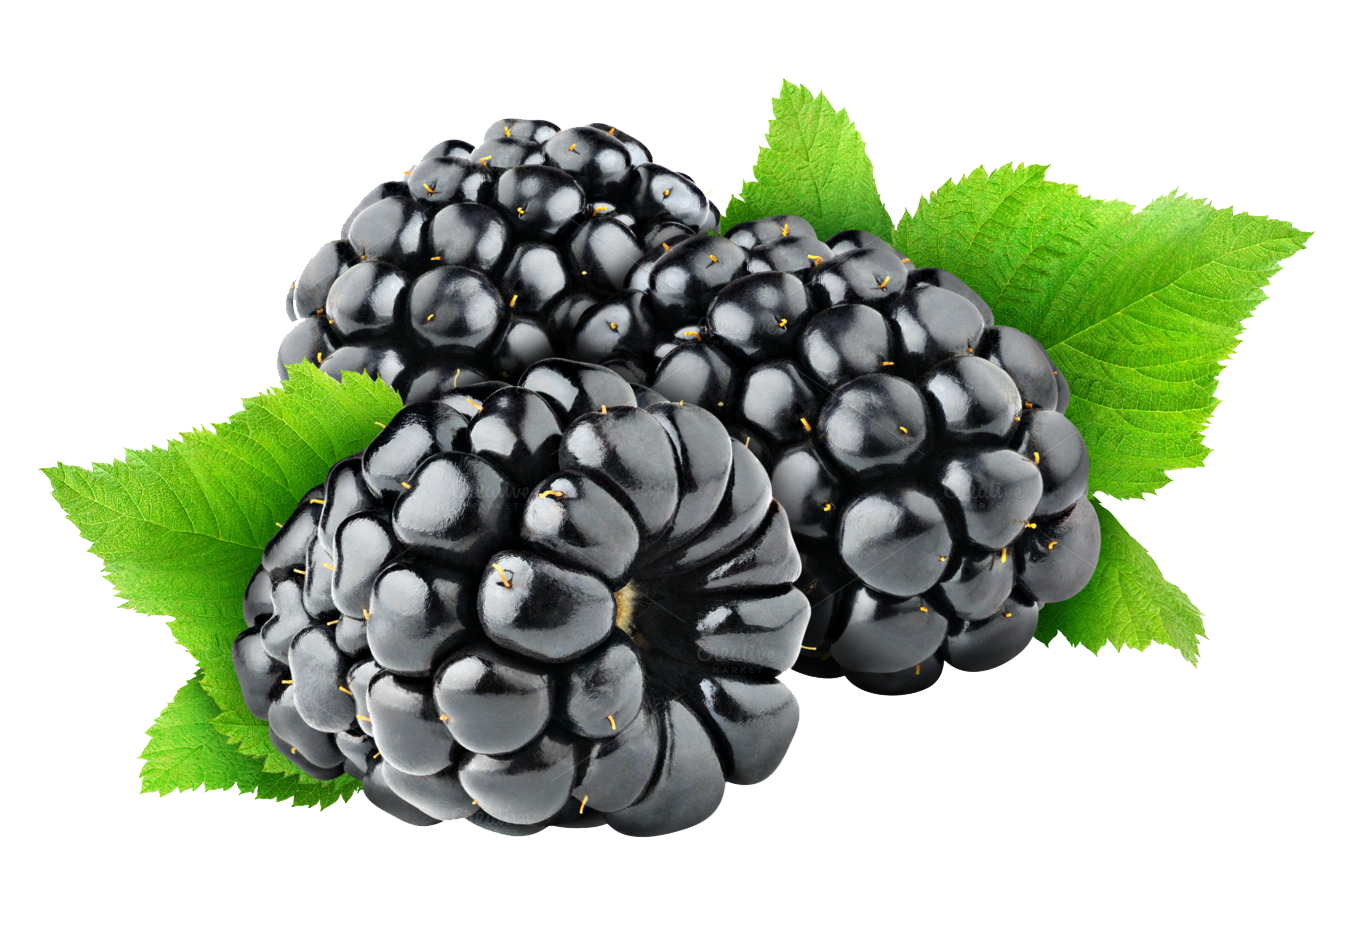 download clipart for blackberry - photo #12